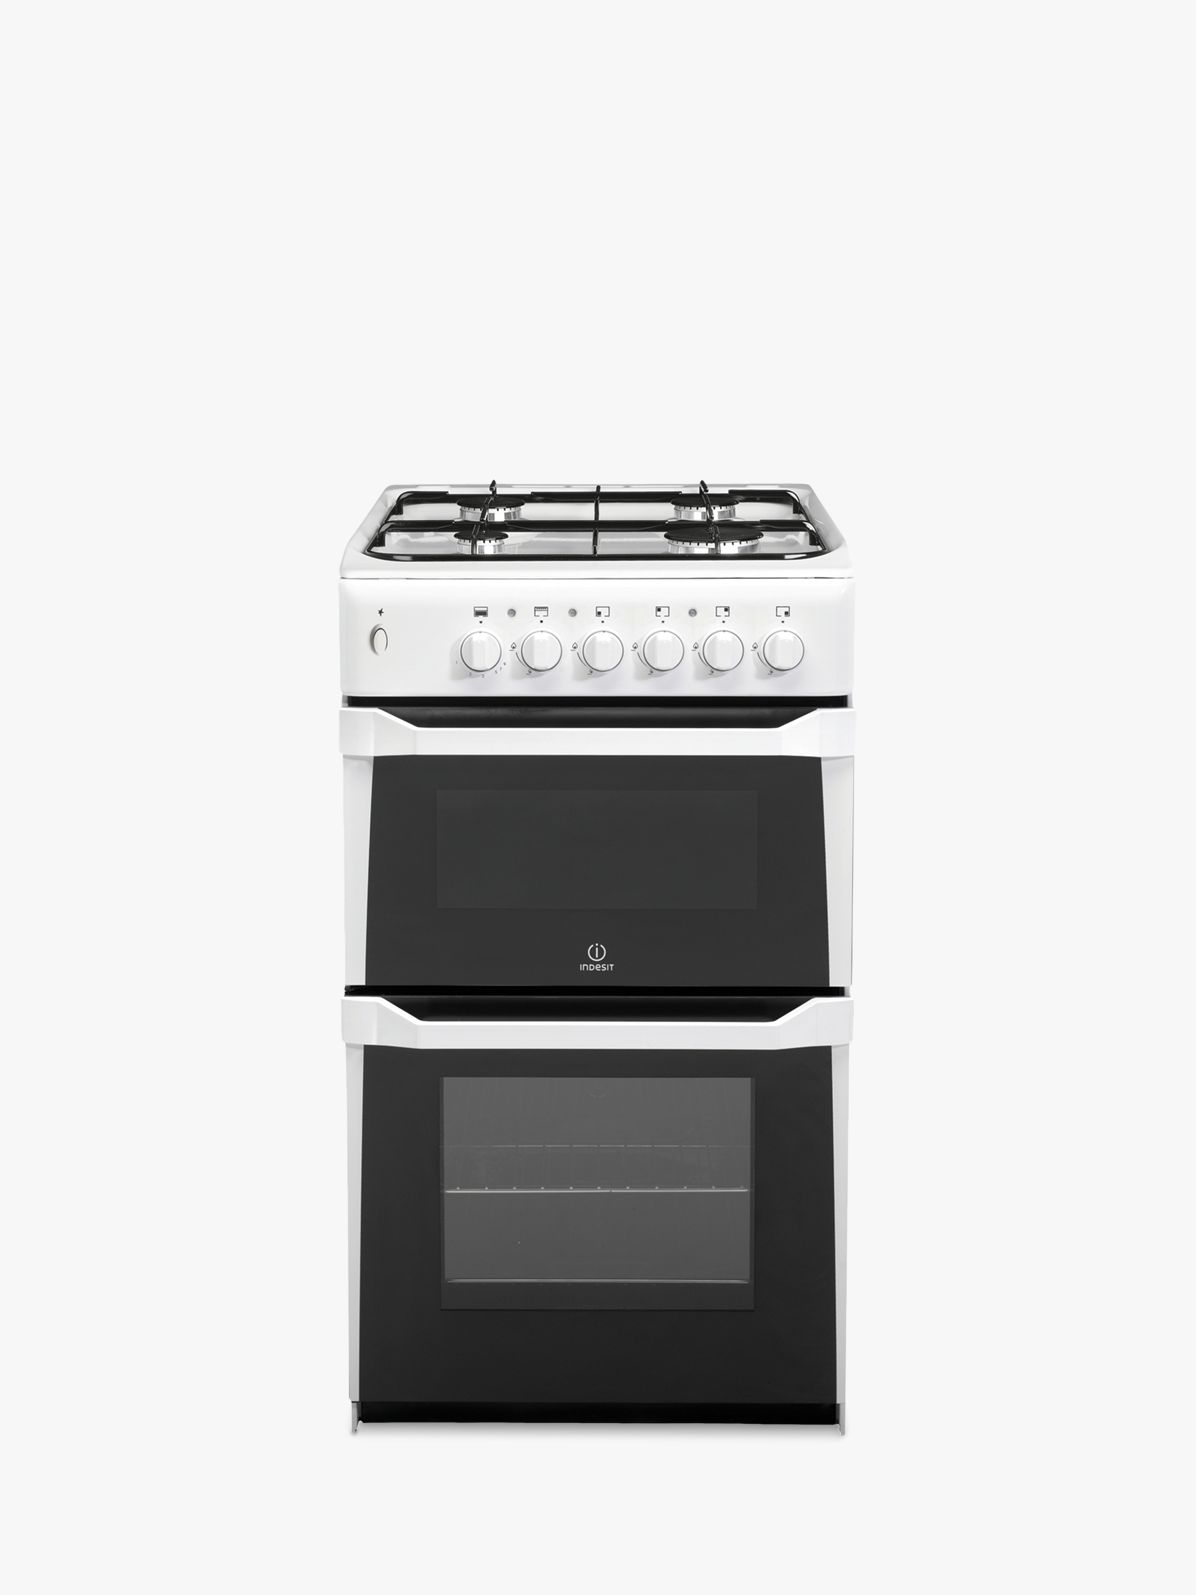 Indesit Advance IT50GW Freestanding Gas Cooker, White